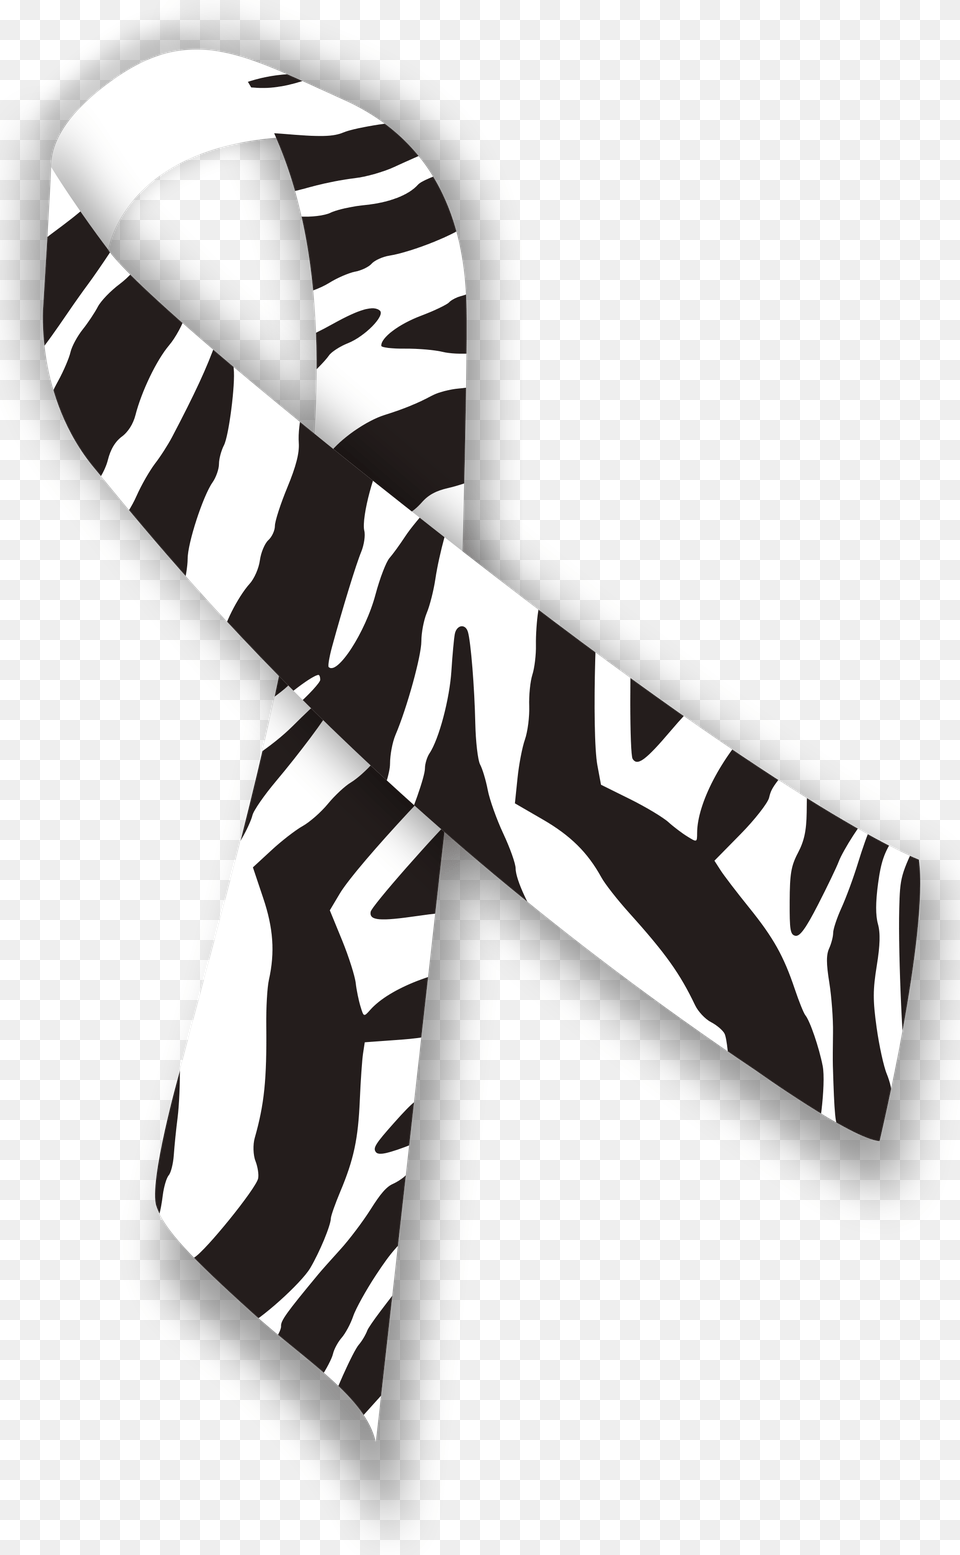 Zebra Ribbon Carcinoid Cancer Awareness Ribbon, Accessories, Formal Wear, Tie, Necktie Free Png